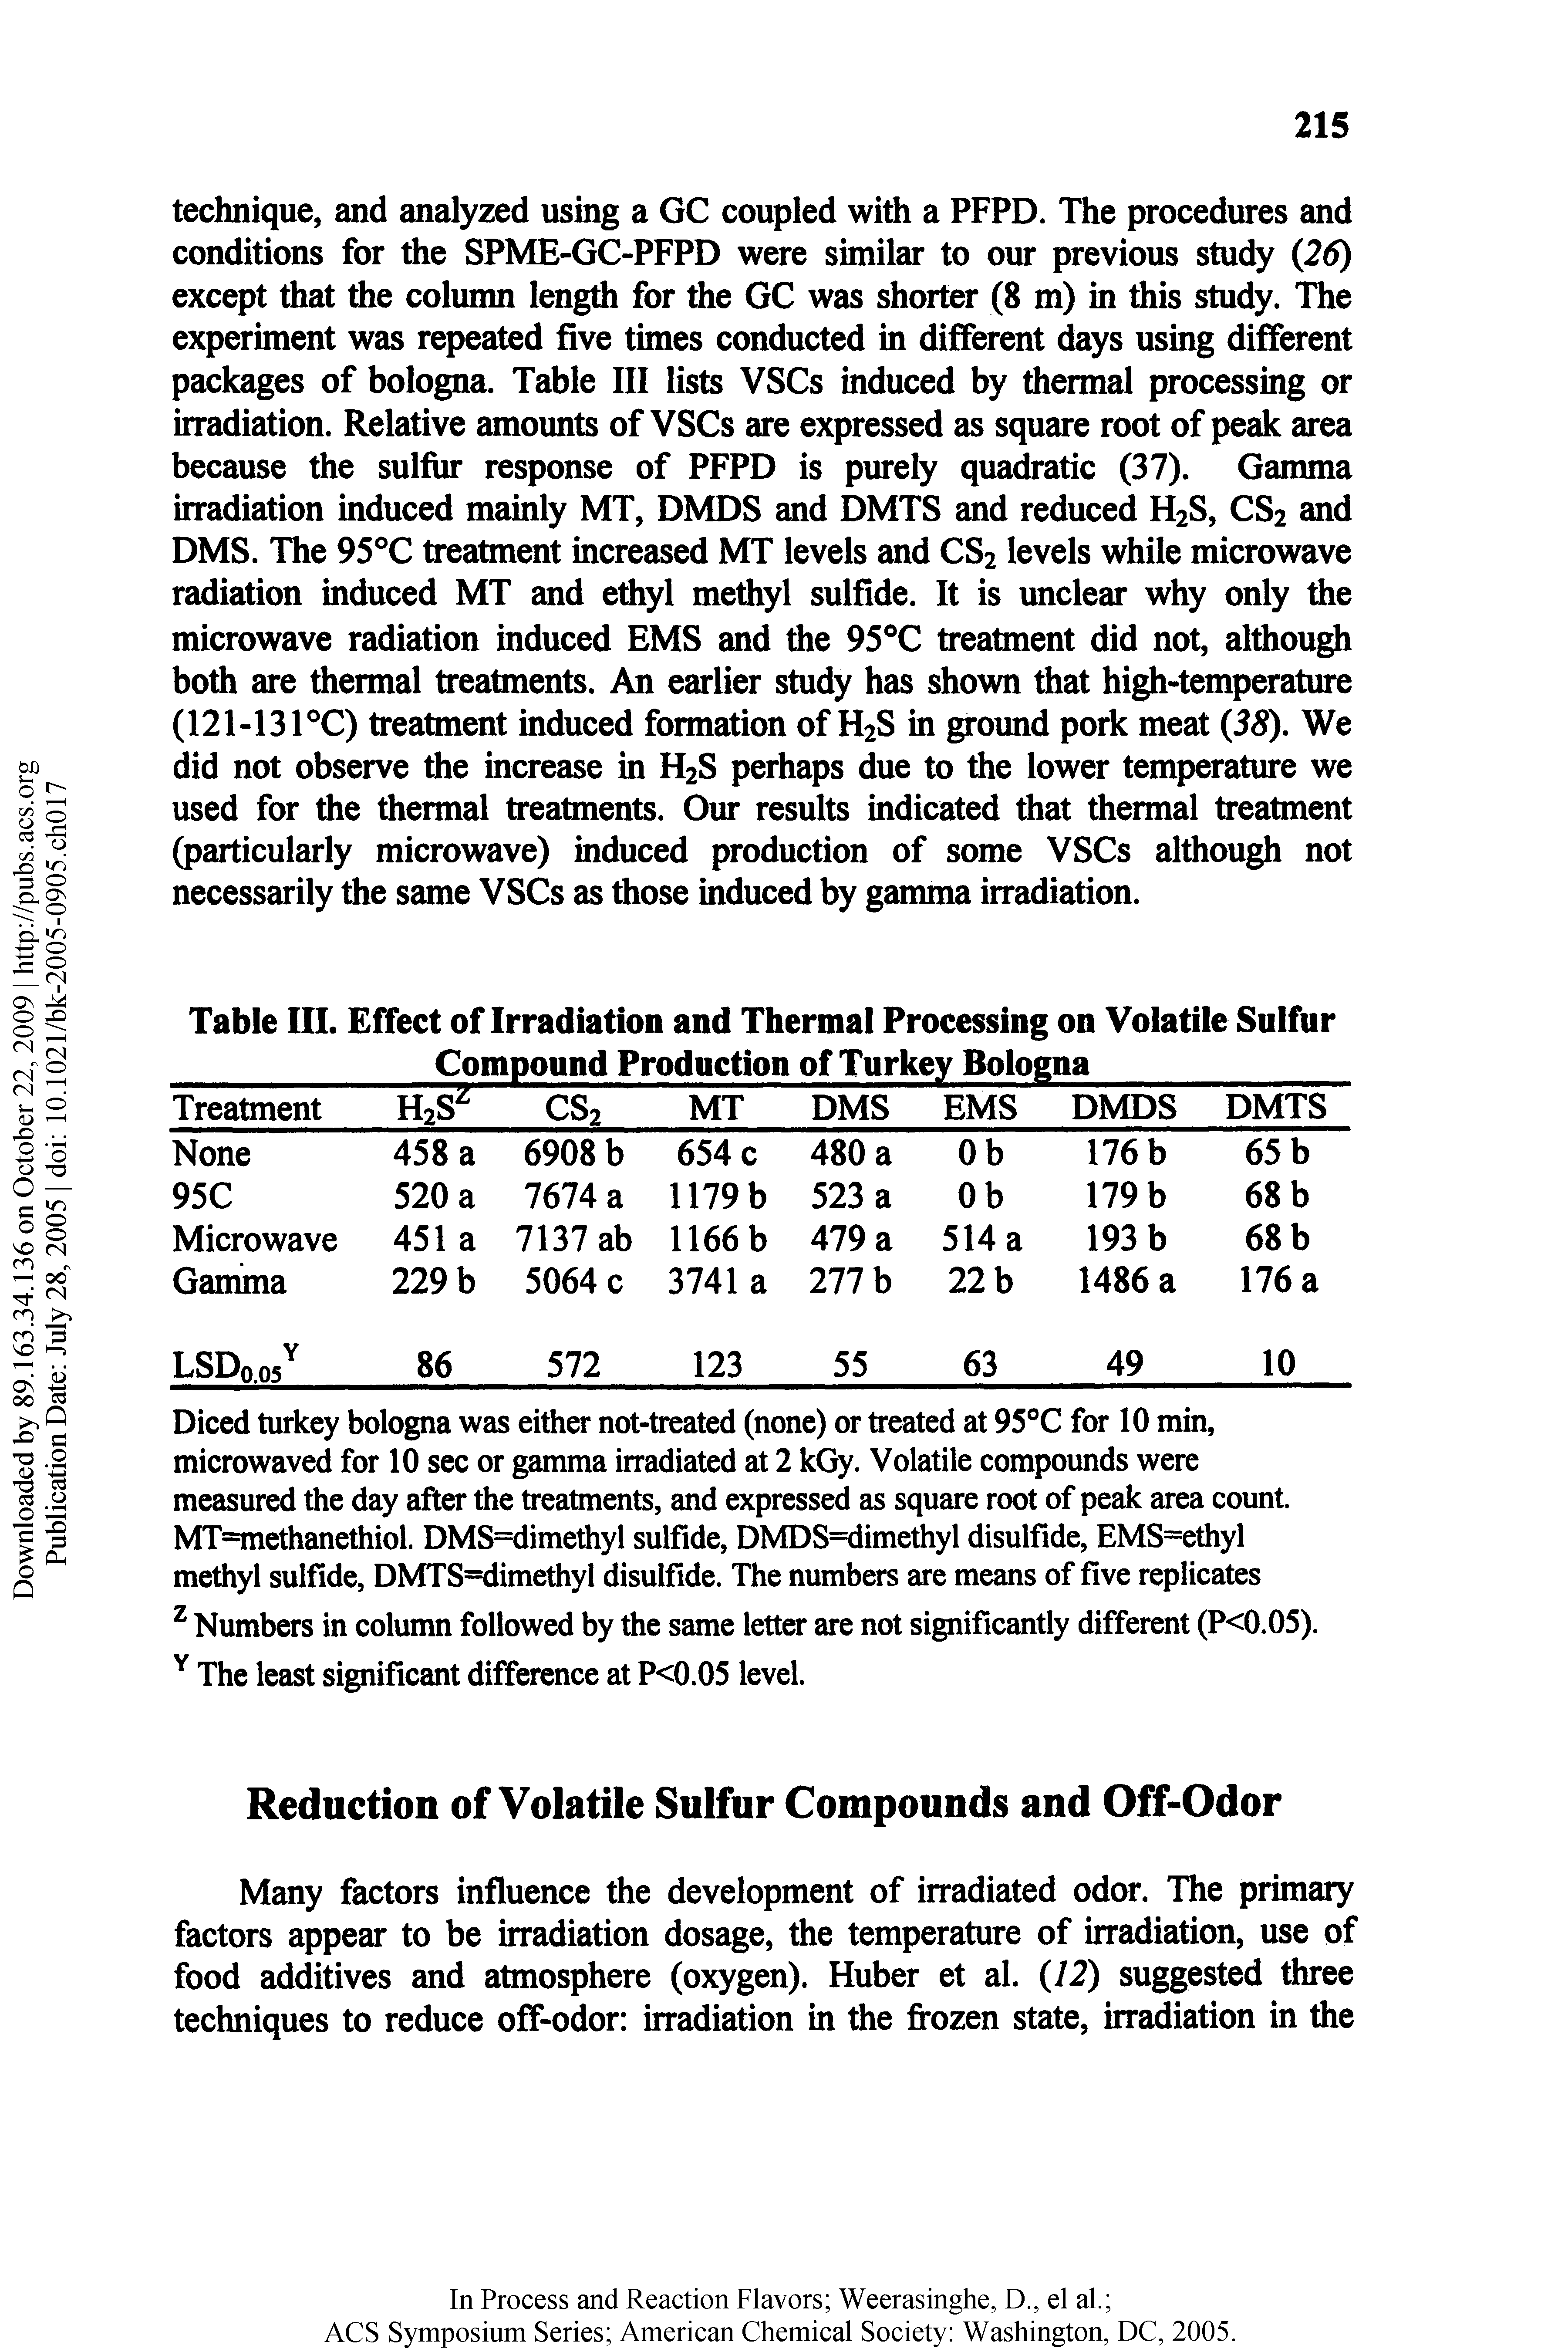 Table III. Effect of Irradiation and Thermal Processing on Volatile Sulfur...